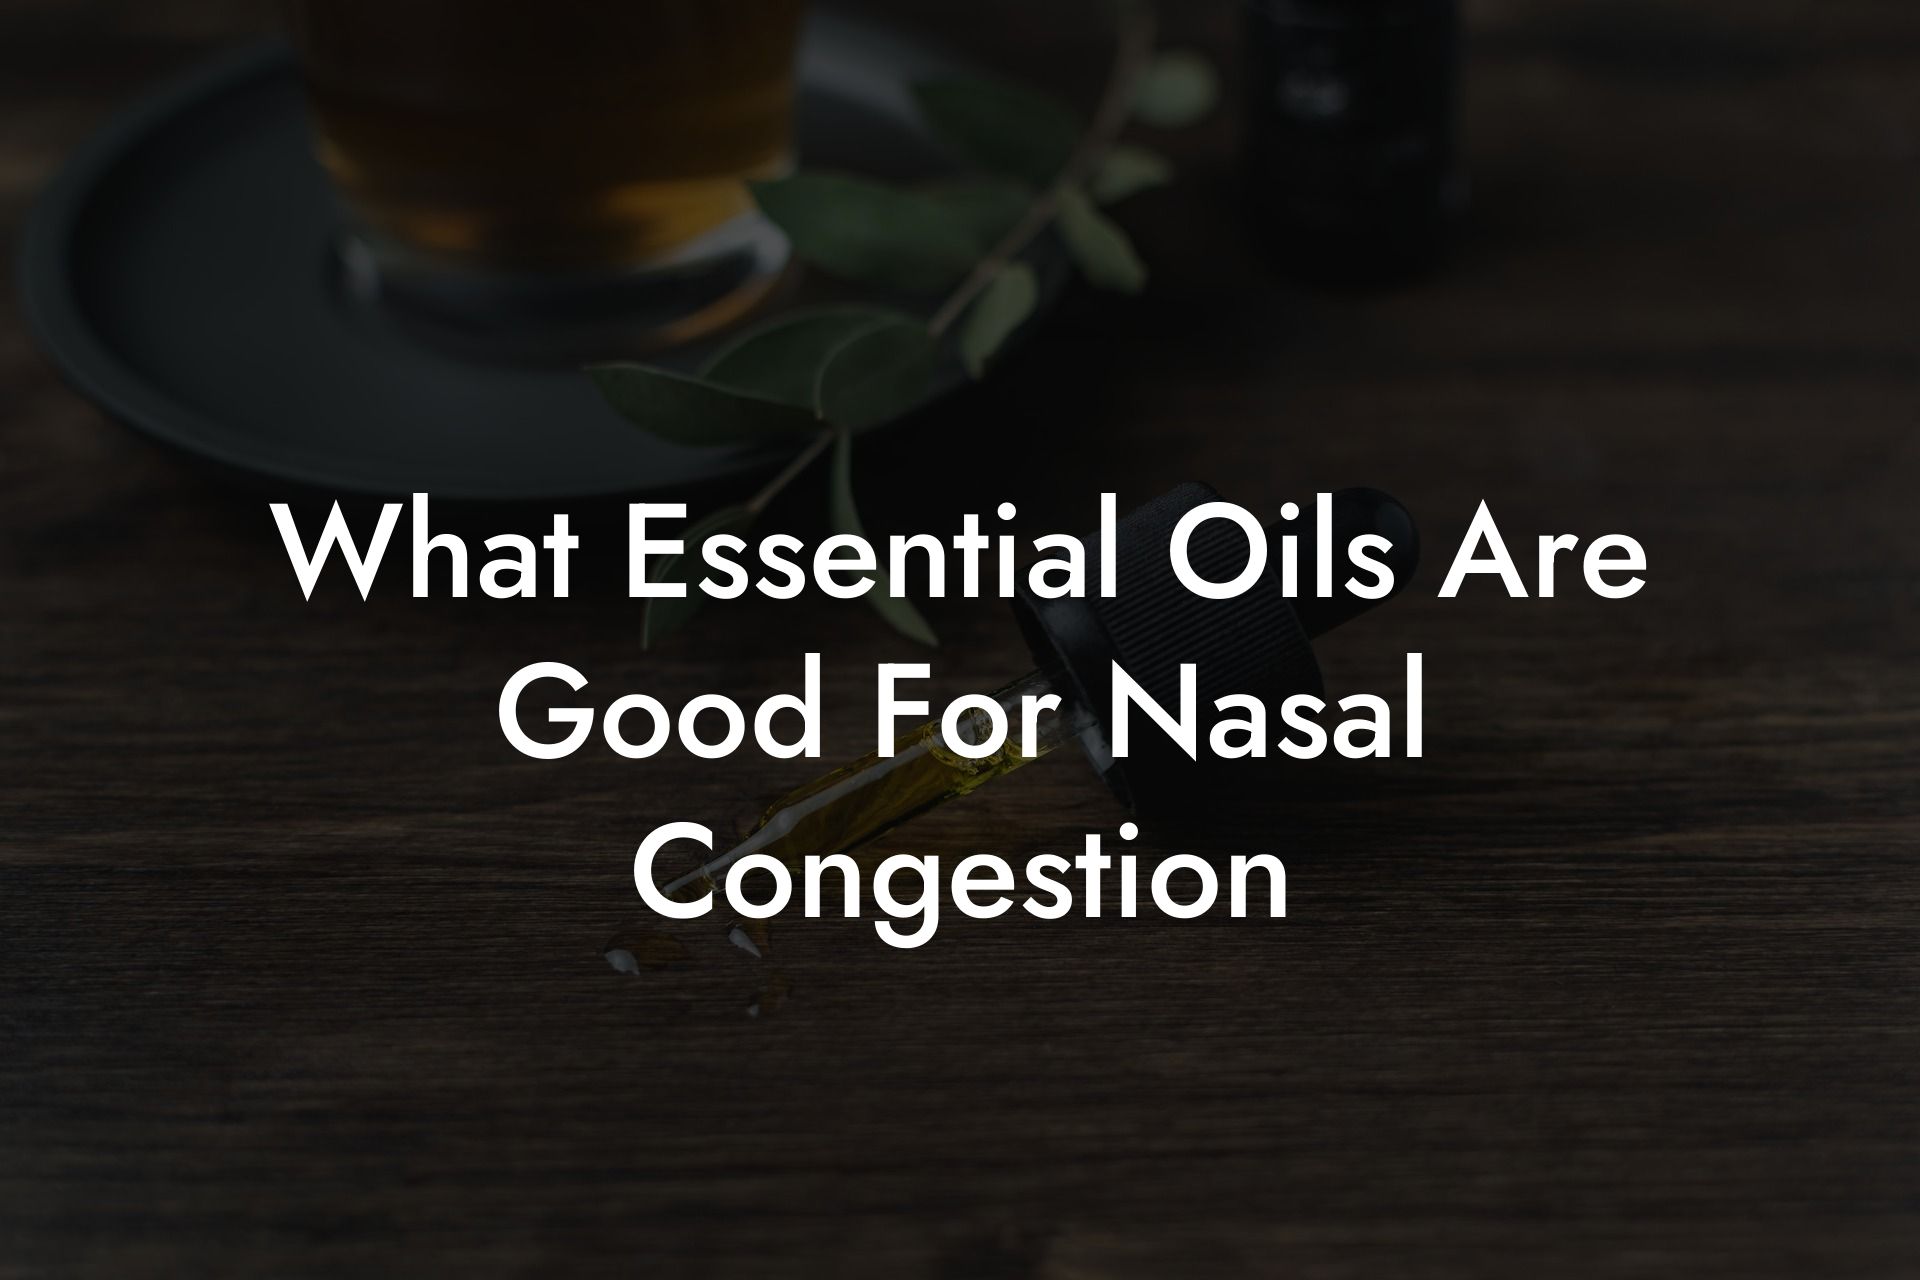 What Essential Oils Are Good For Nasal Congestion